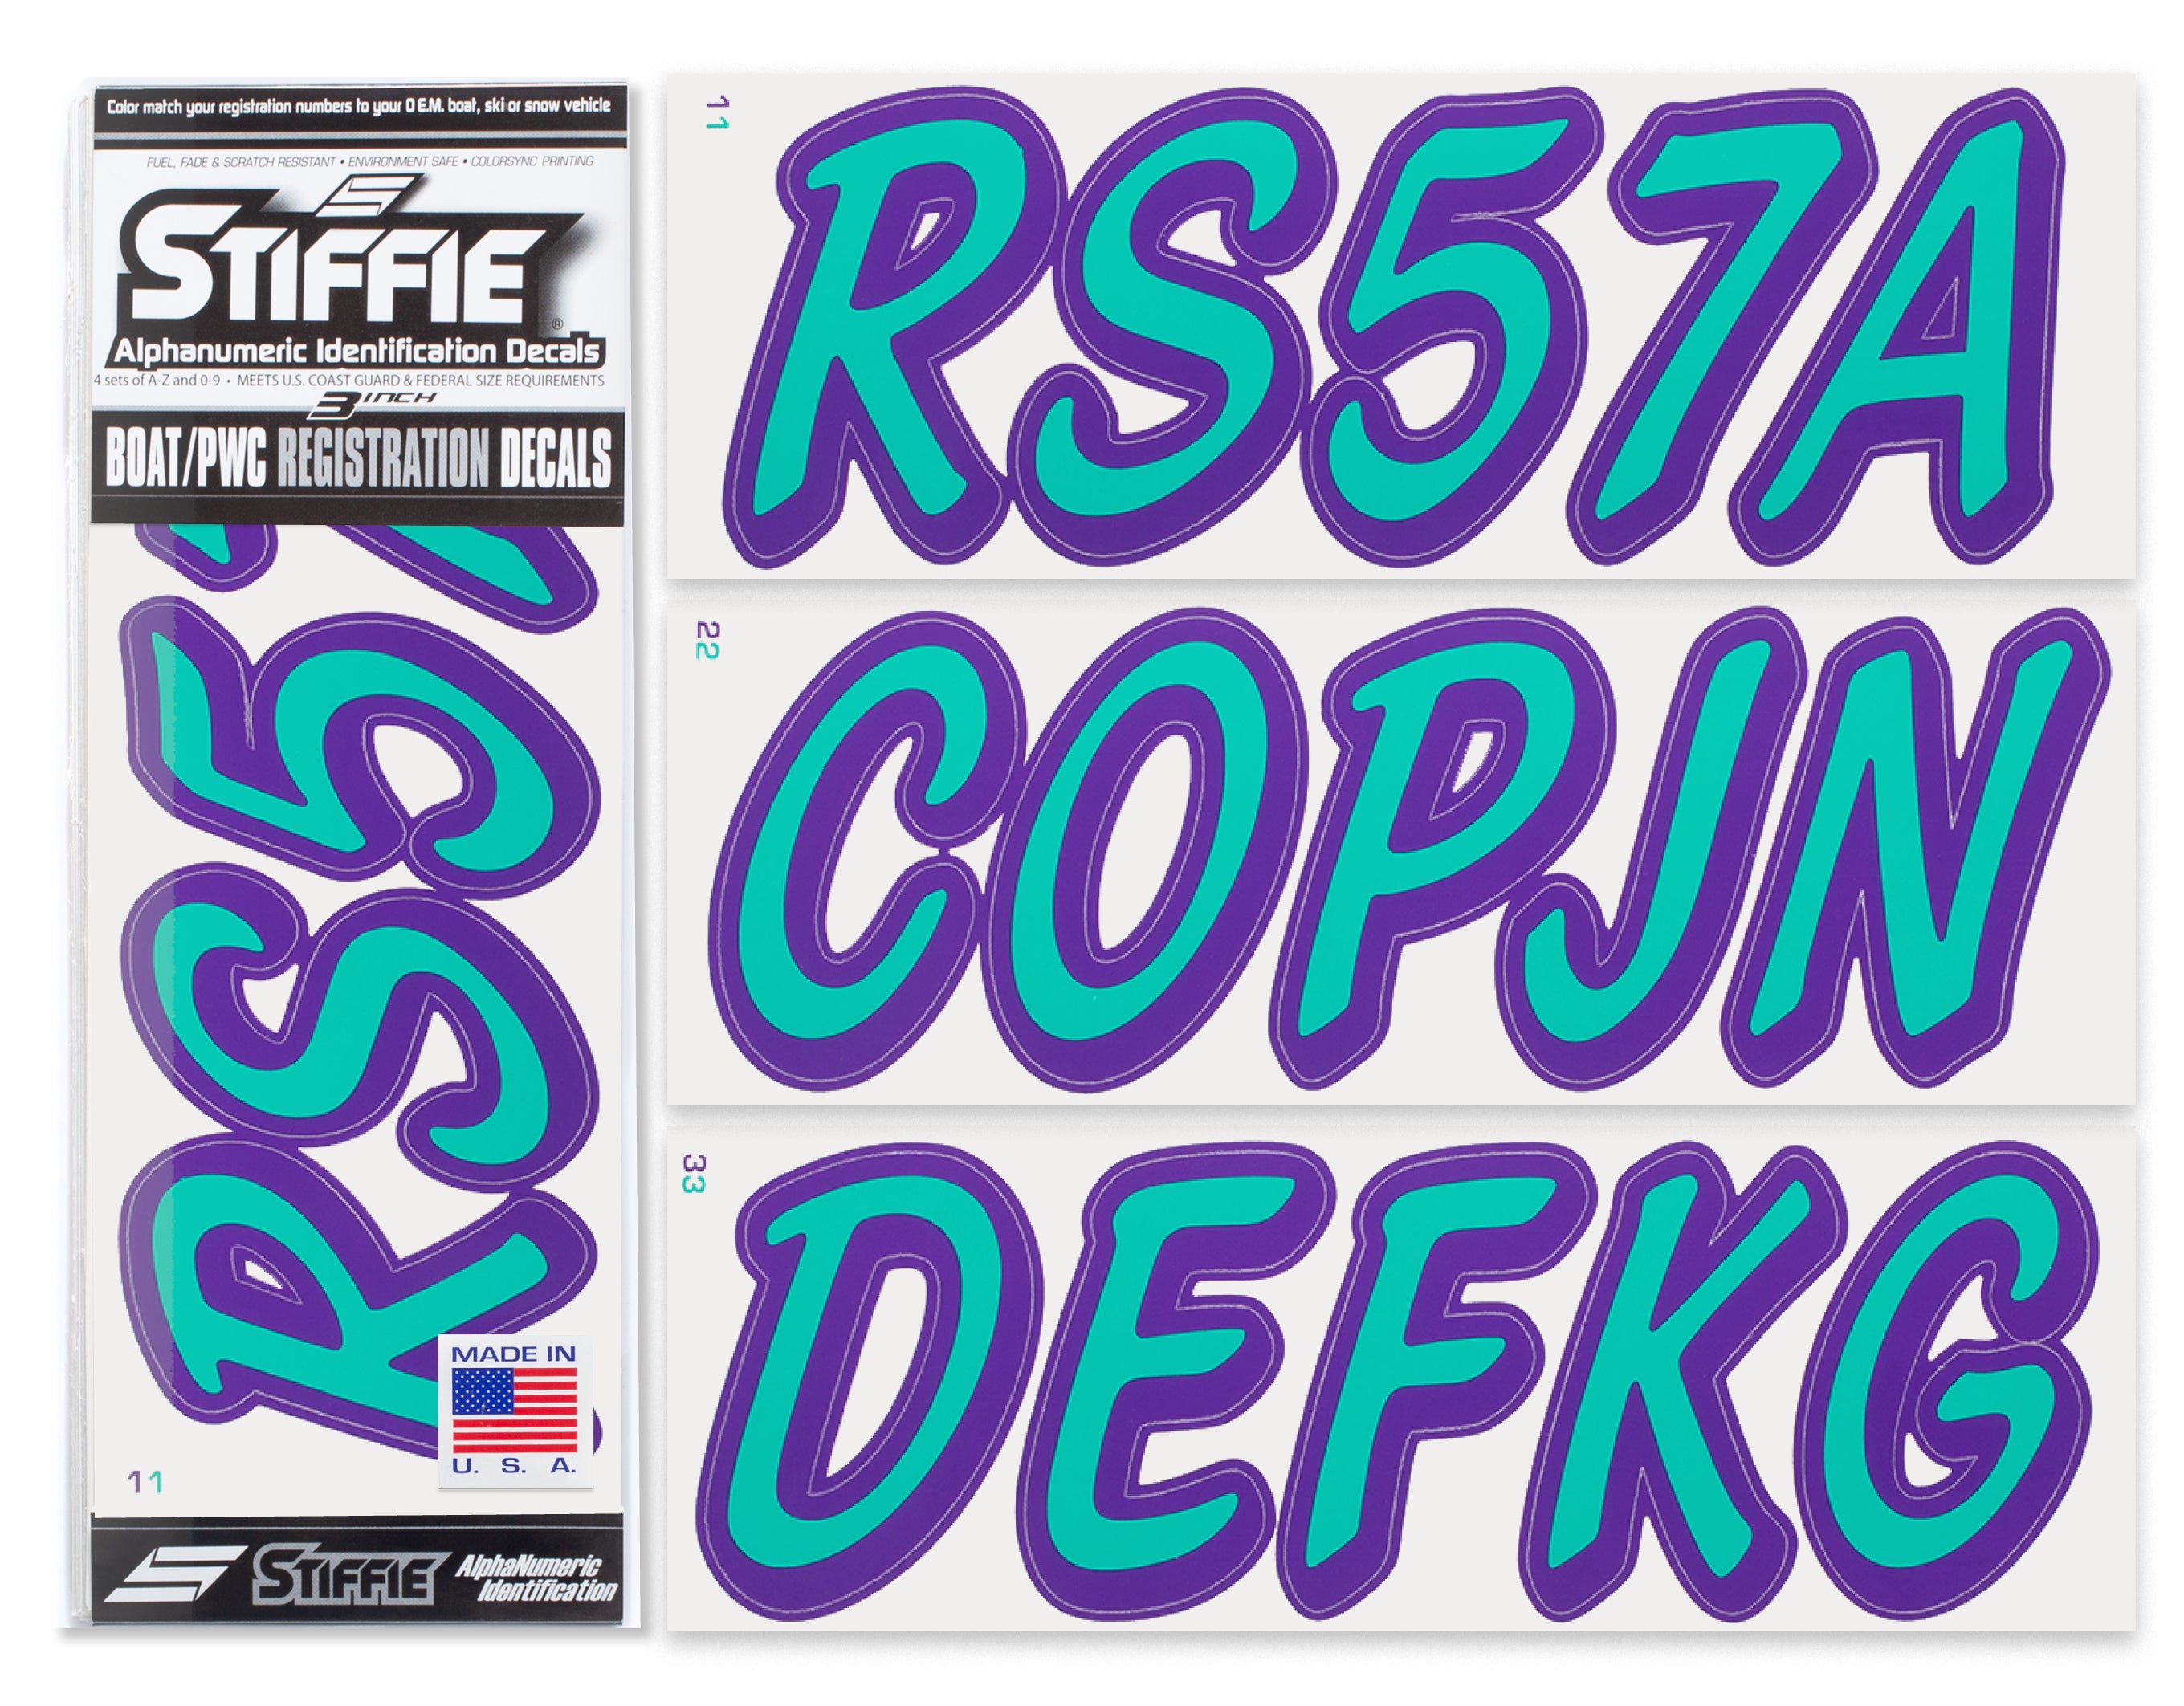 STIFFIE Whipline Solid SeaTeal/Purple 3" Alpha-Numeric Registration Identification Numbers Stickers Decals for Boats & Personal Watercraft